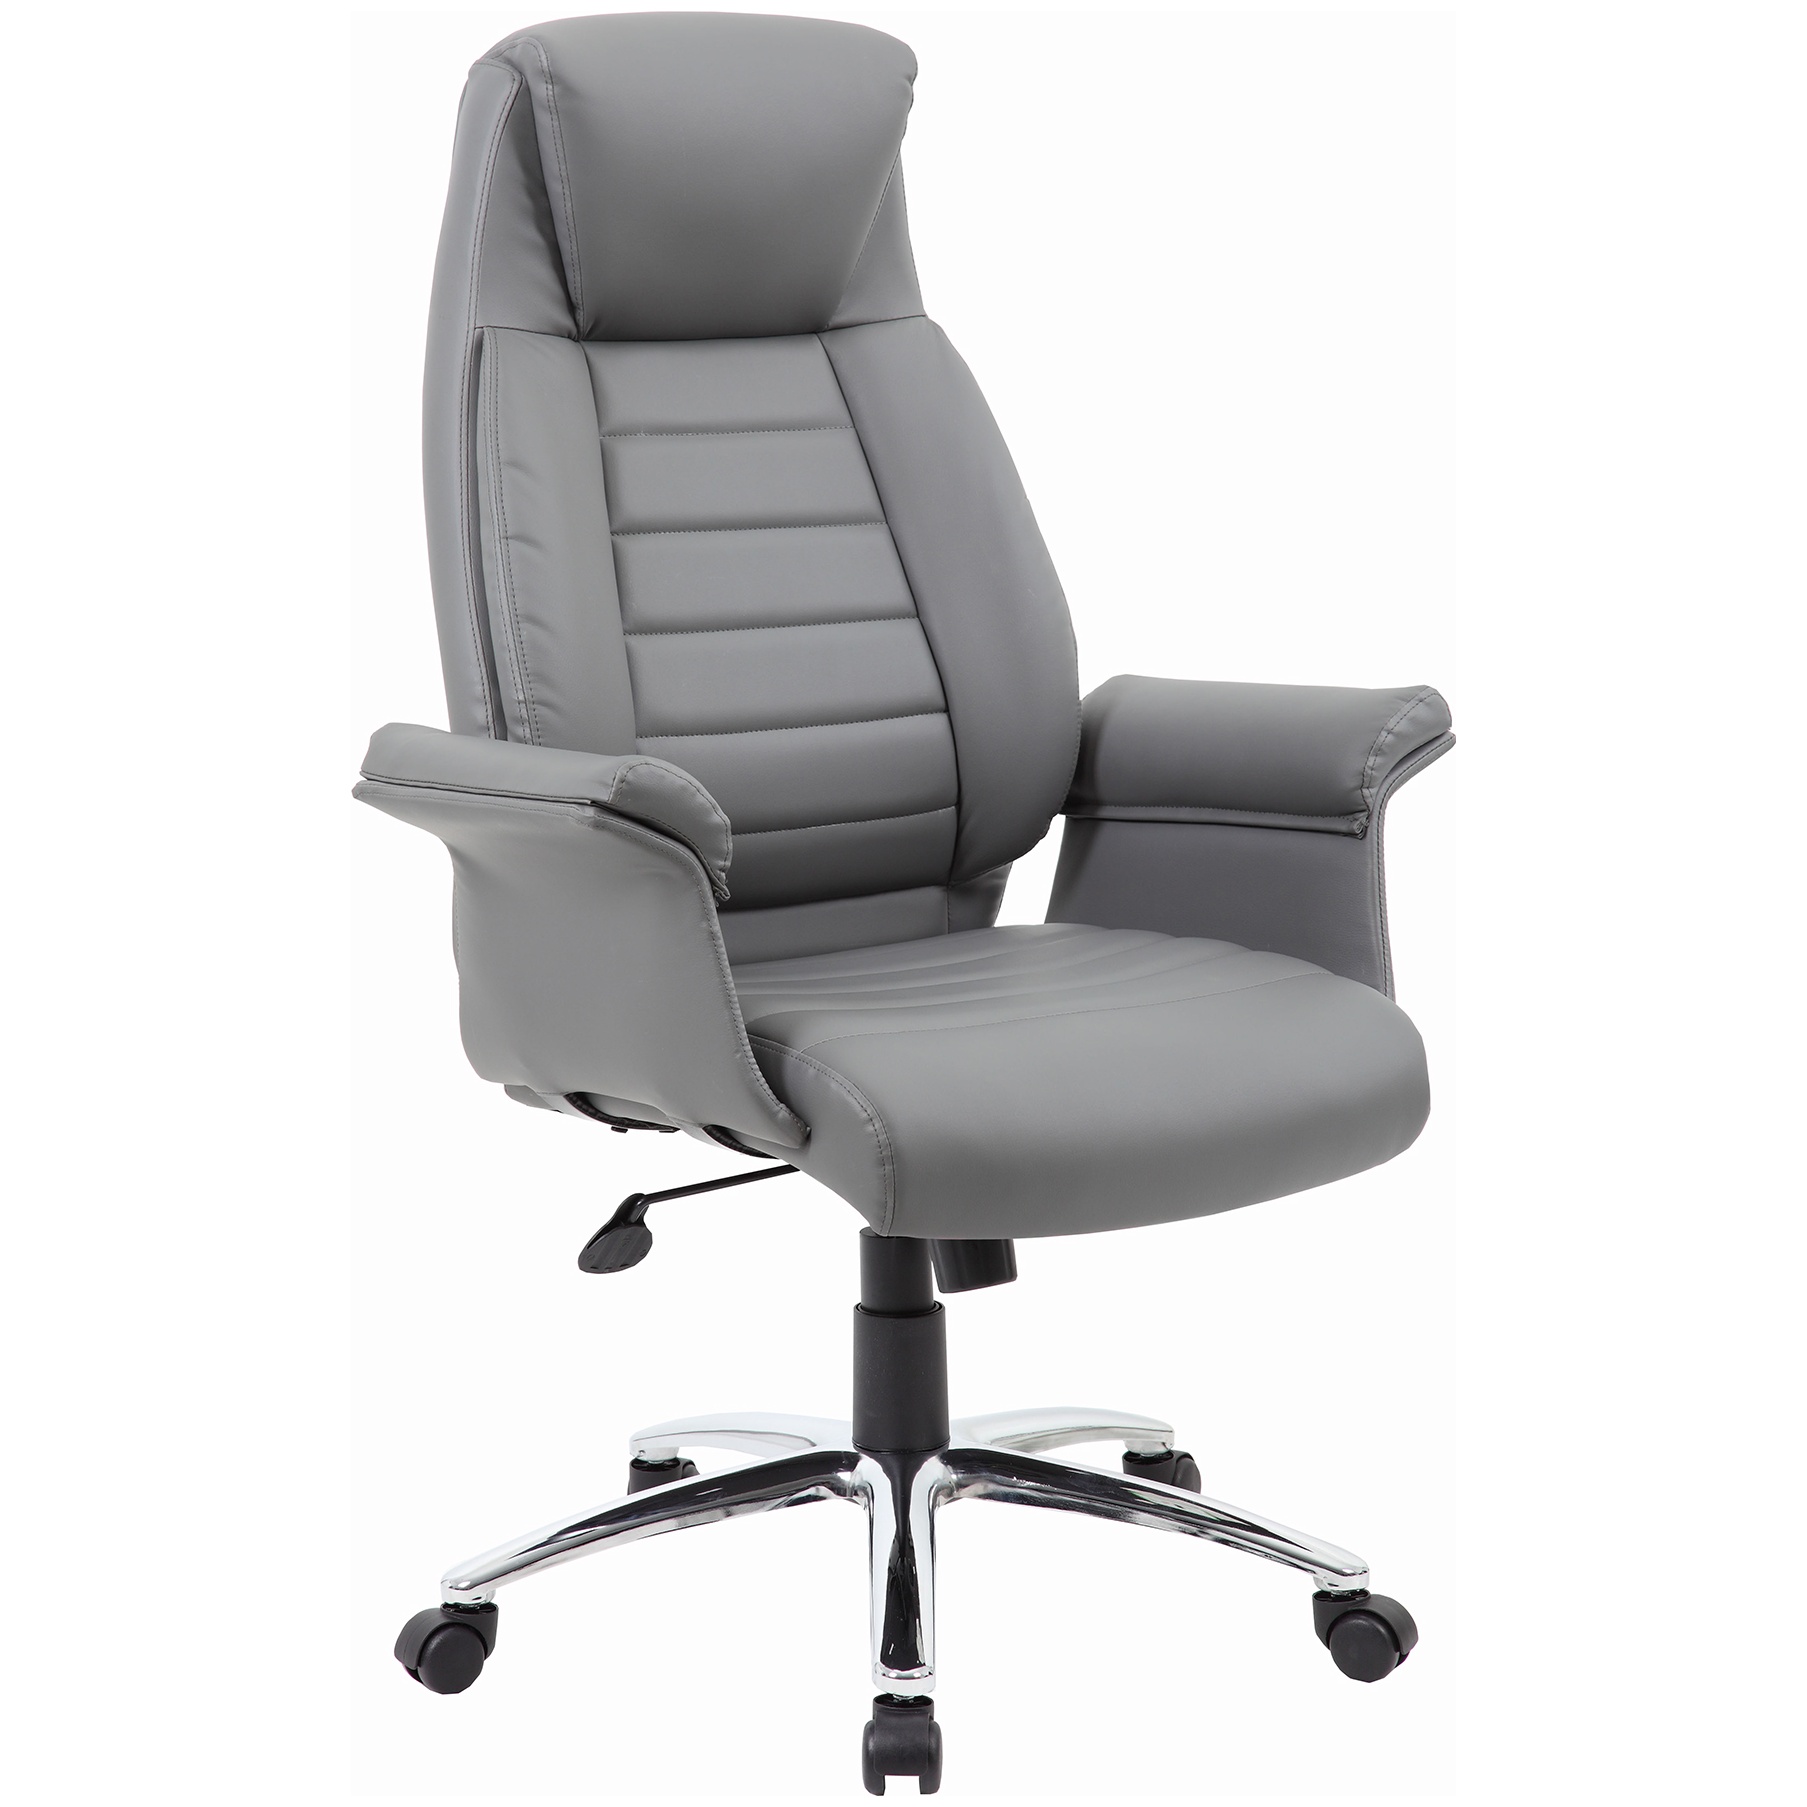 Jersey Executive Leather Faced Office Chairs | Executive ...